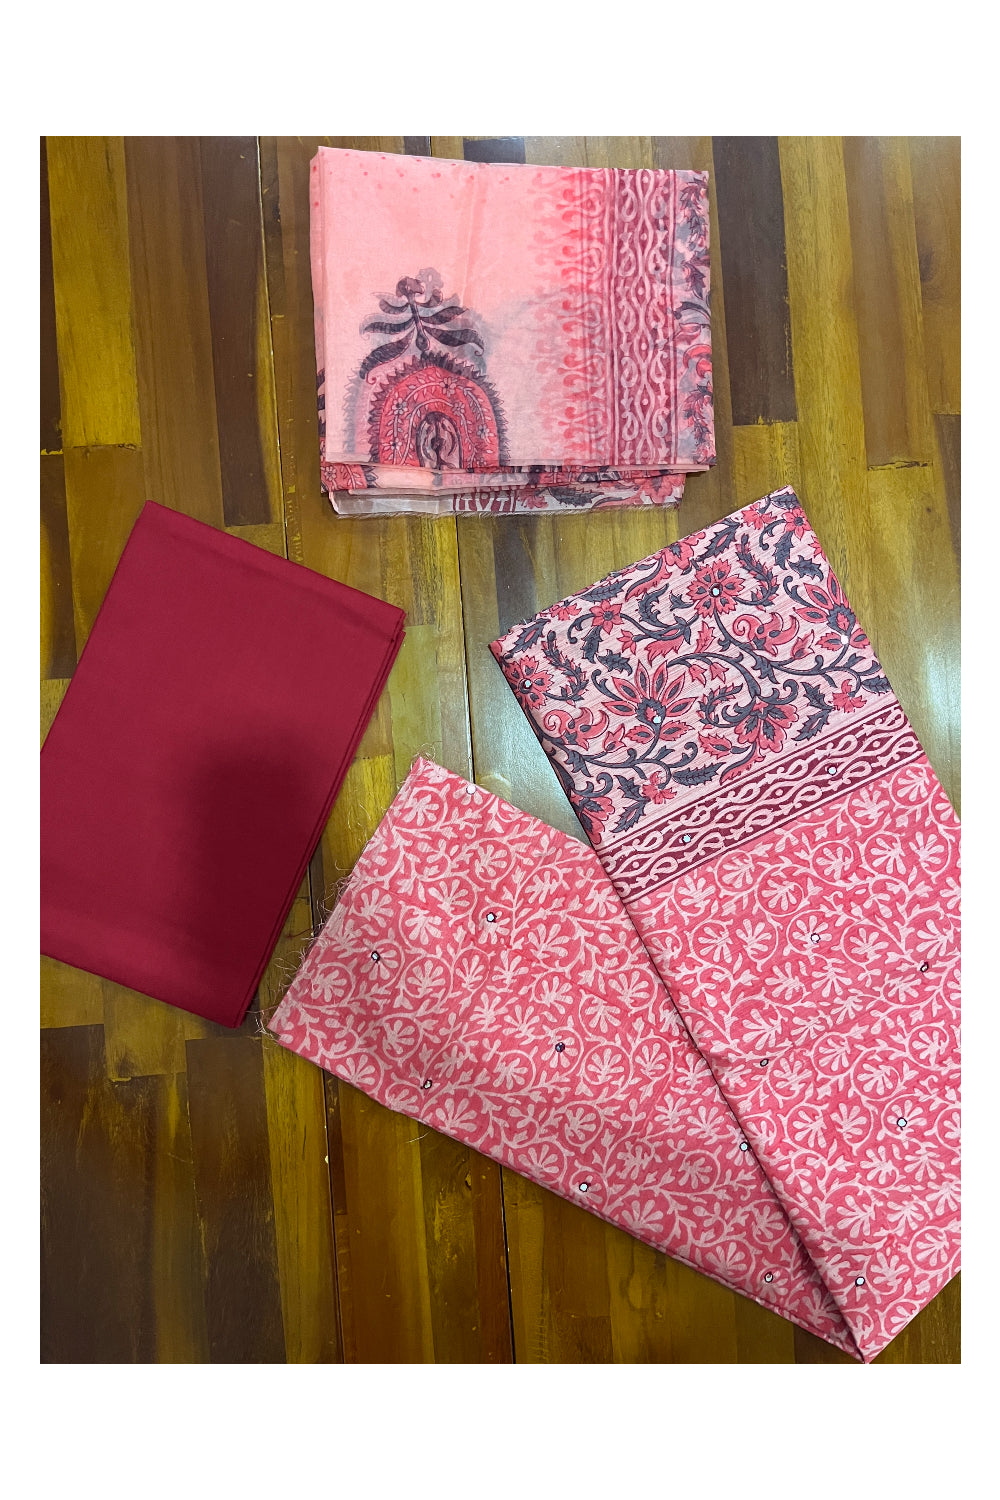 Southloom™ Cotton Churidar Salwar Suit Material in Red with Floral Prints